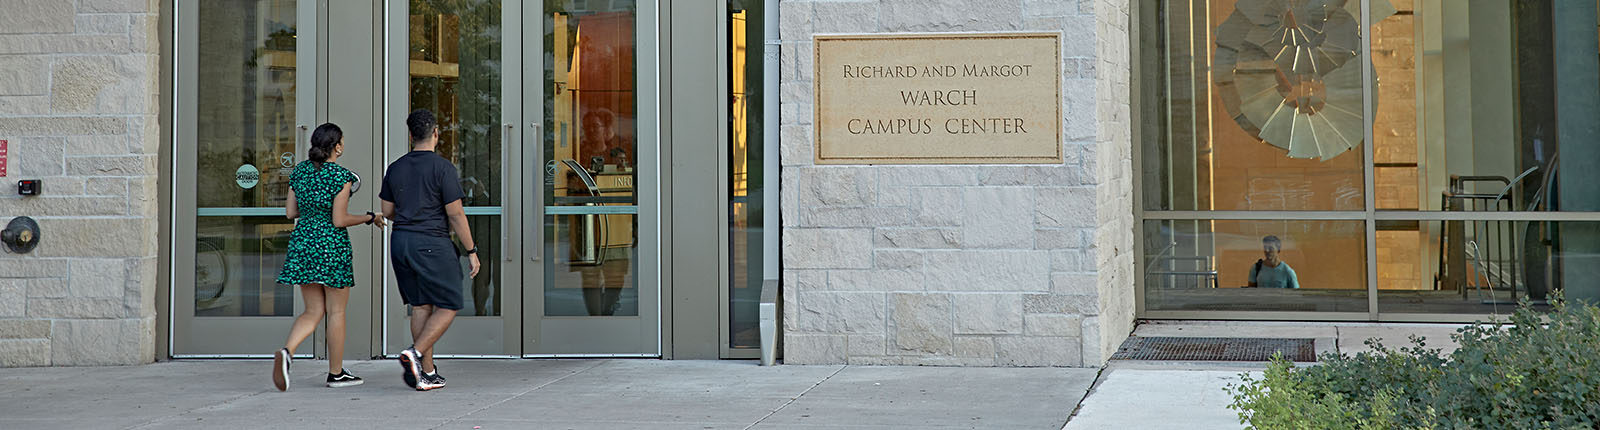 Students Entering Warch Campus Center